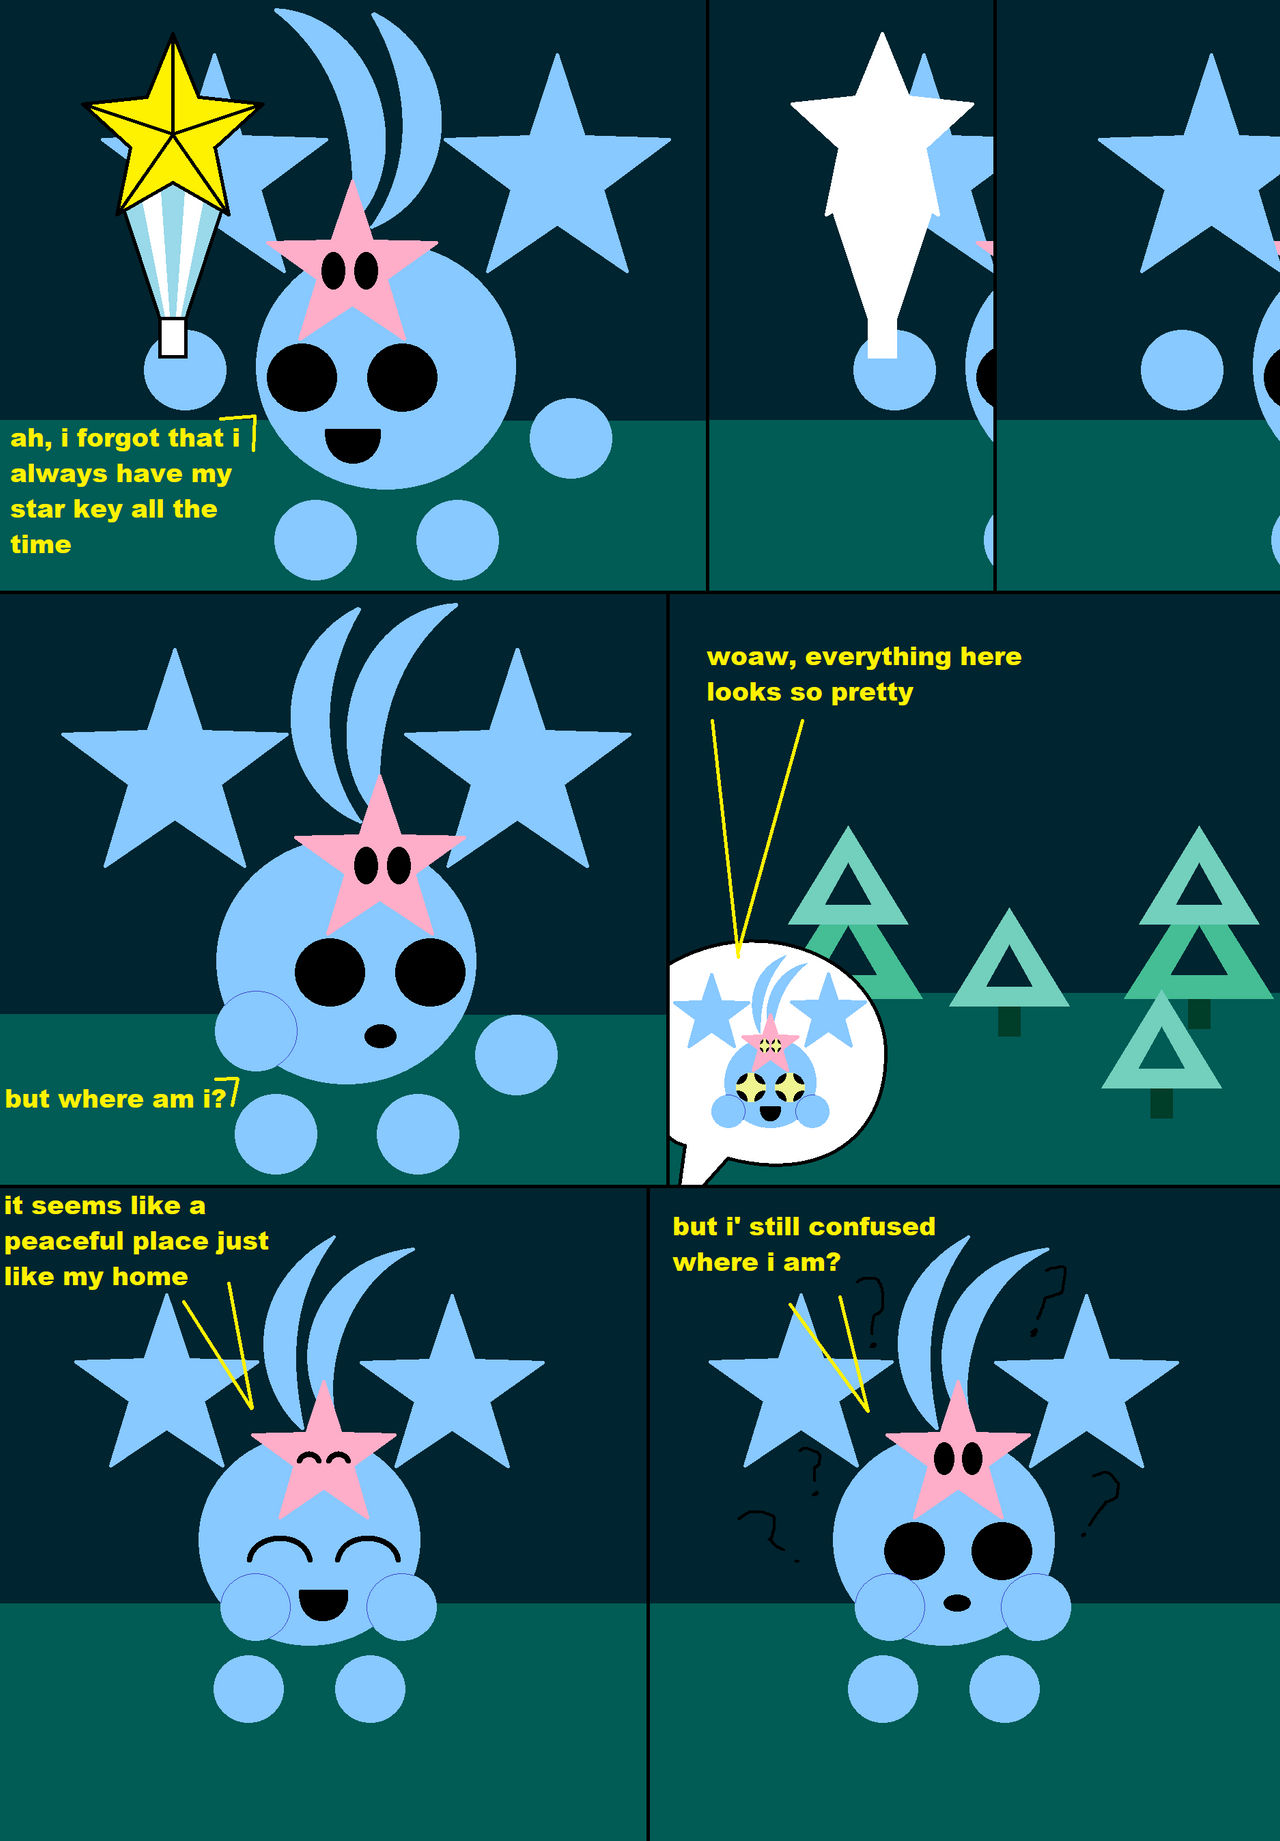 Just Shapes and Beats: The Star Hero page 2 by Linedol on DeviantArt